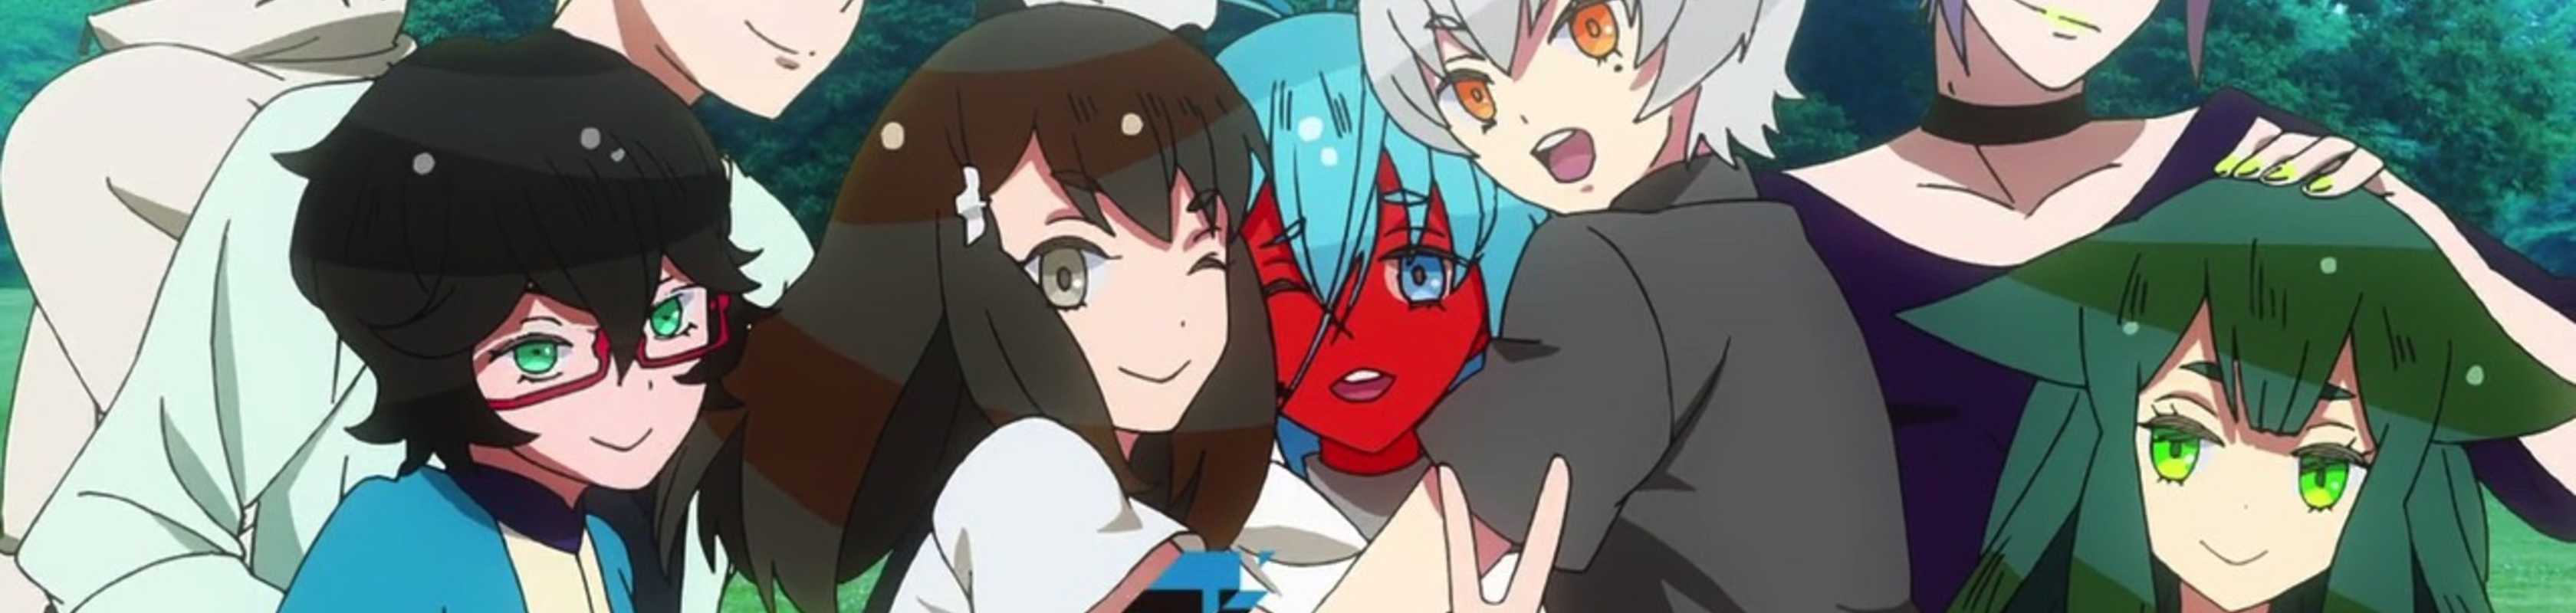 Gatchaman Crowds | Anime Review